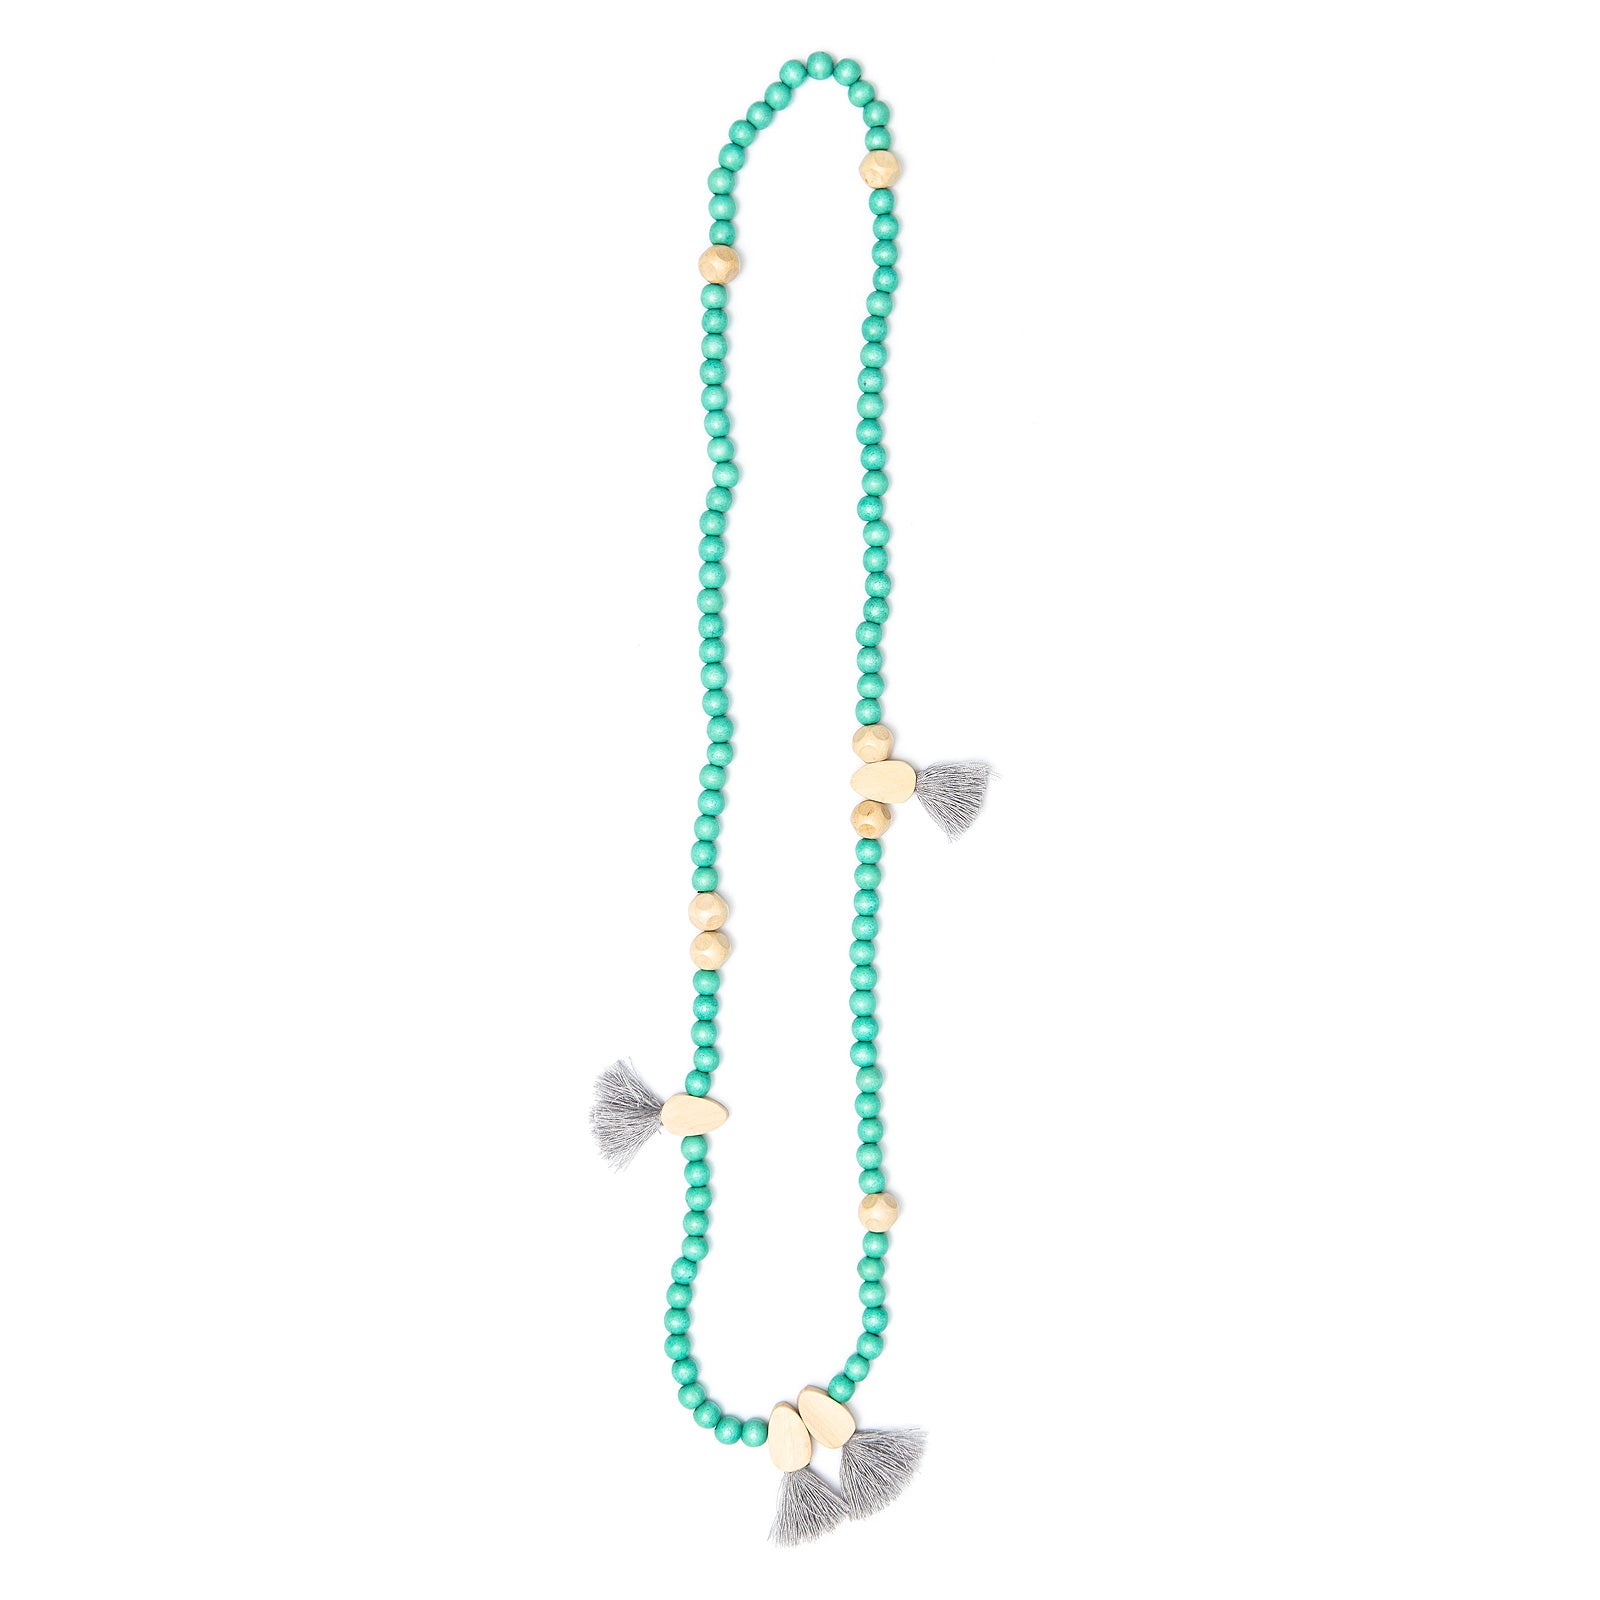 Tiny Egg Cluster bead and tassel necklace